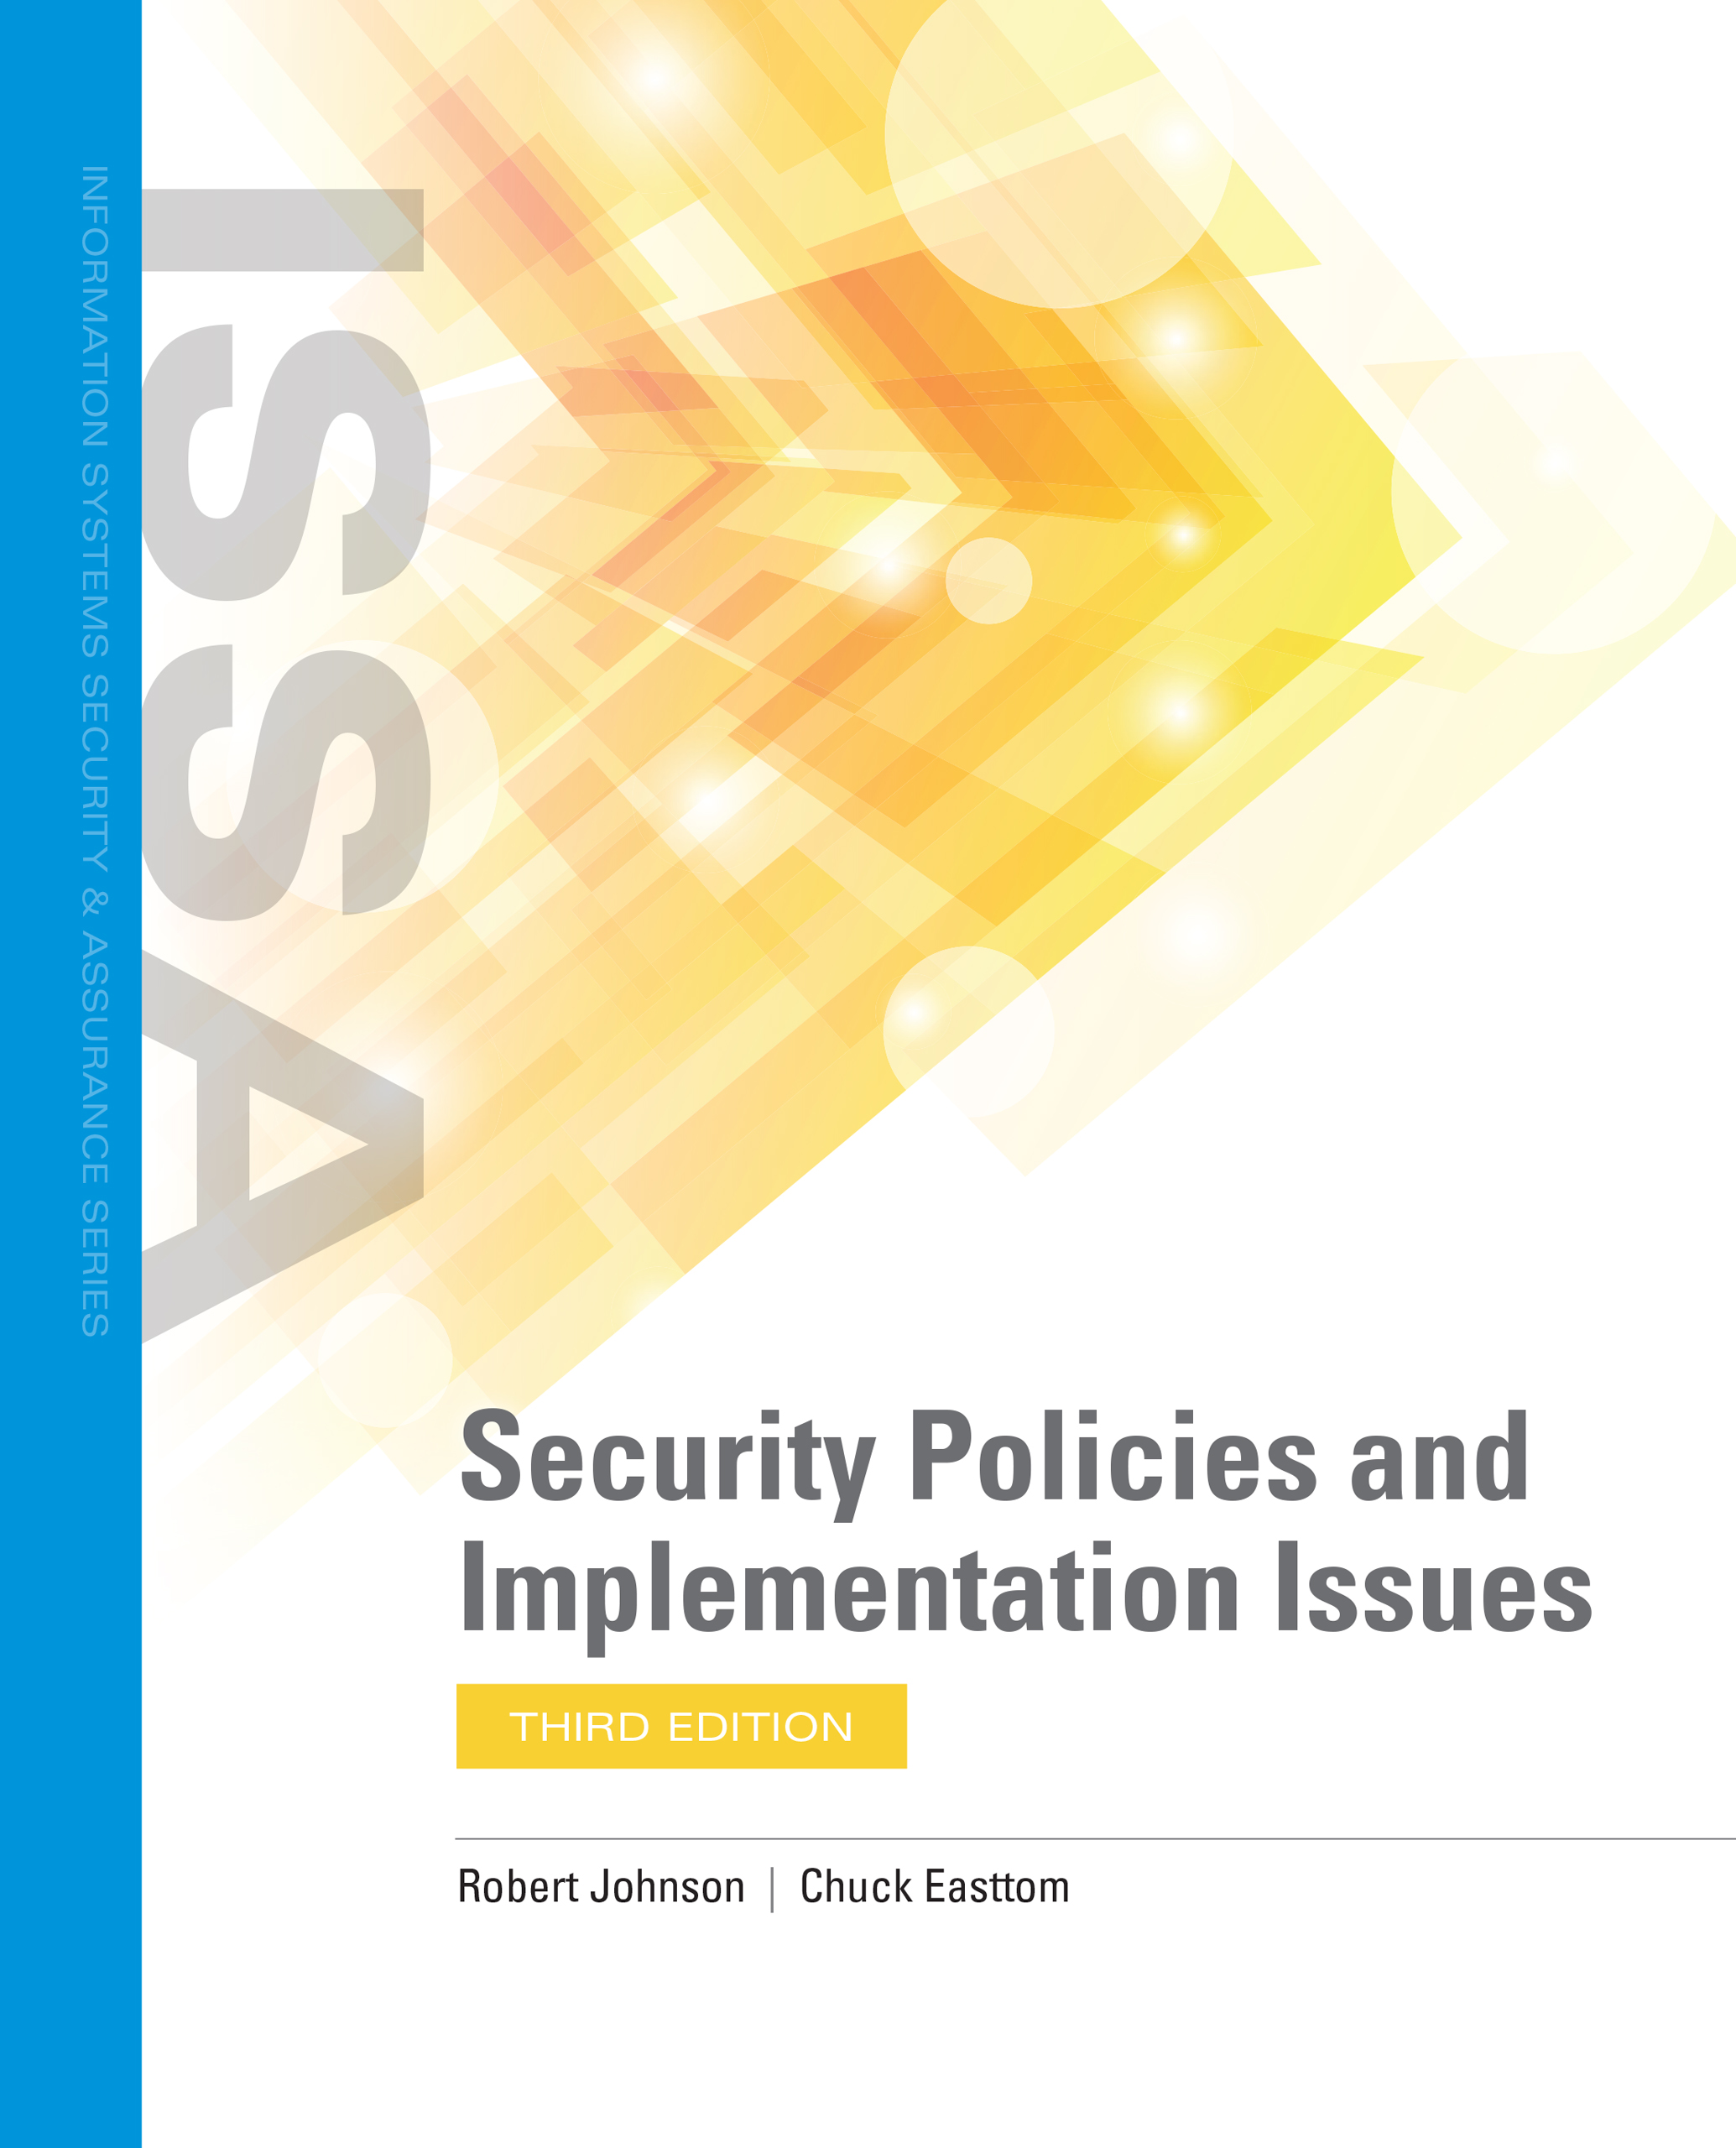 Cover: Security Policies and Implementation Issues by Robert Johnson and Chuck Easttom